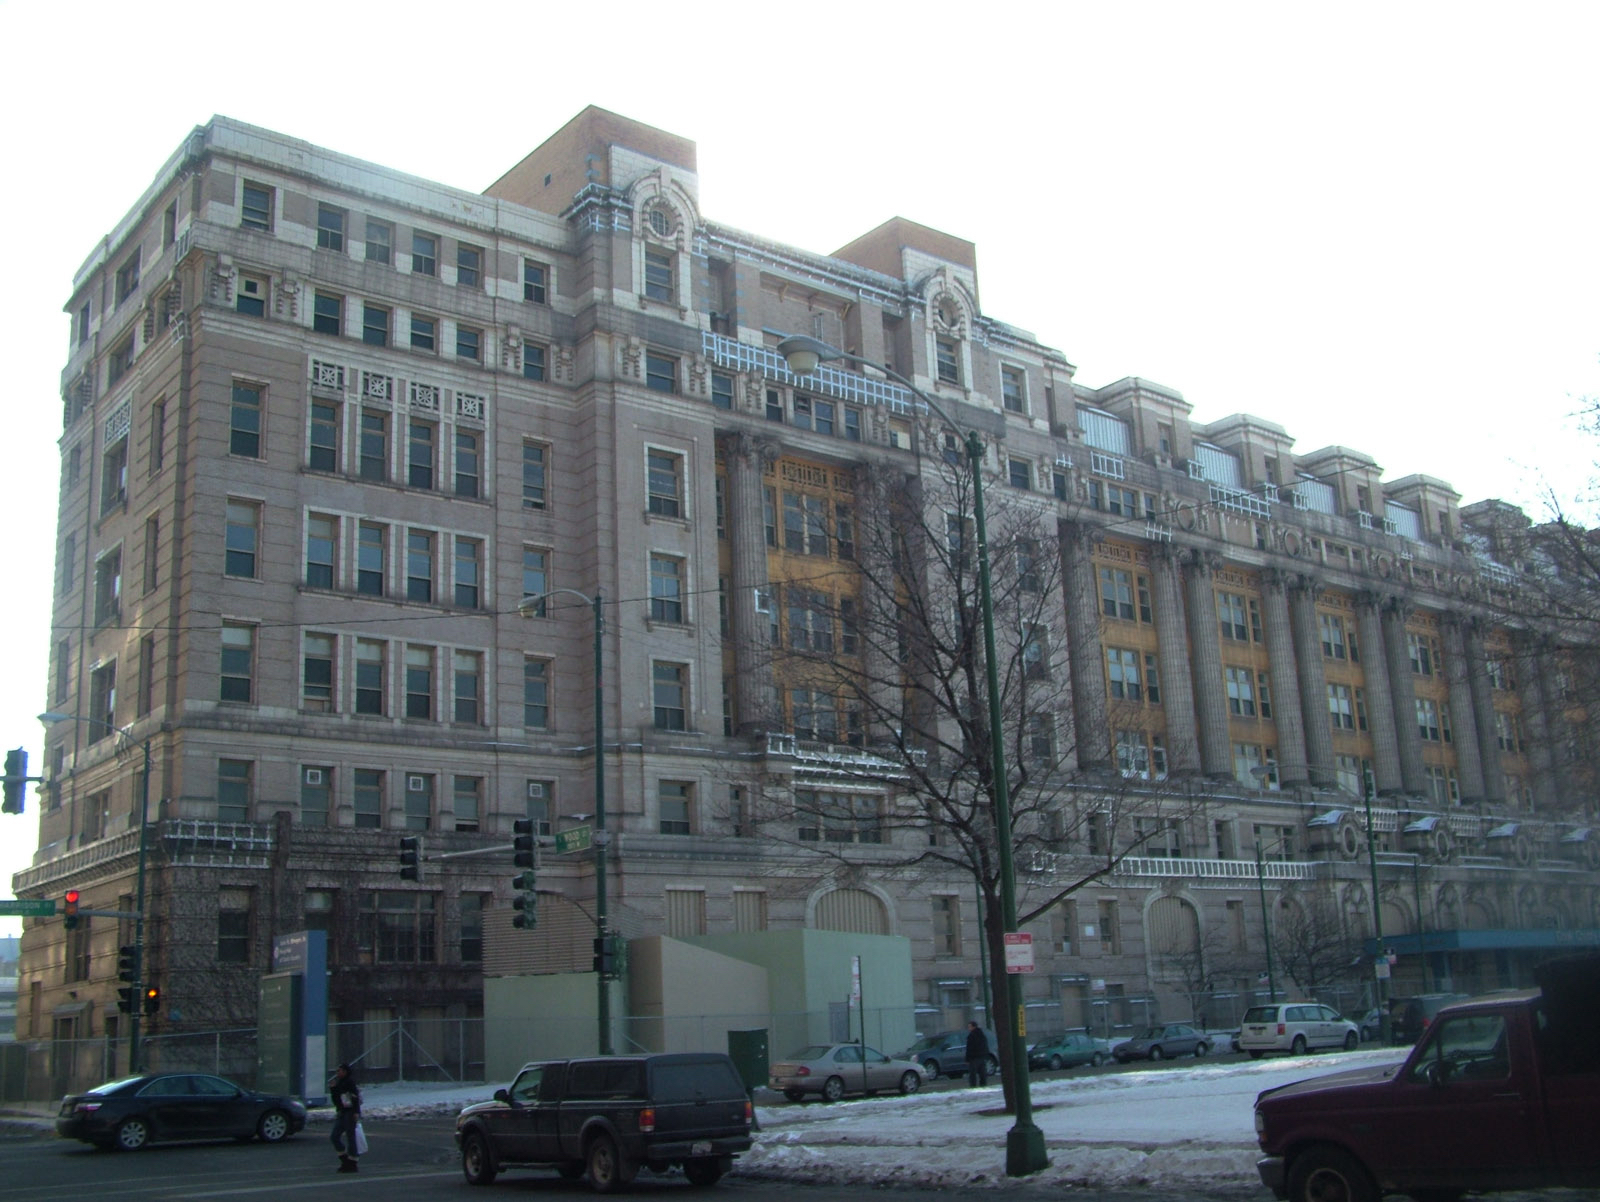 Cook County Hospital